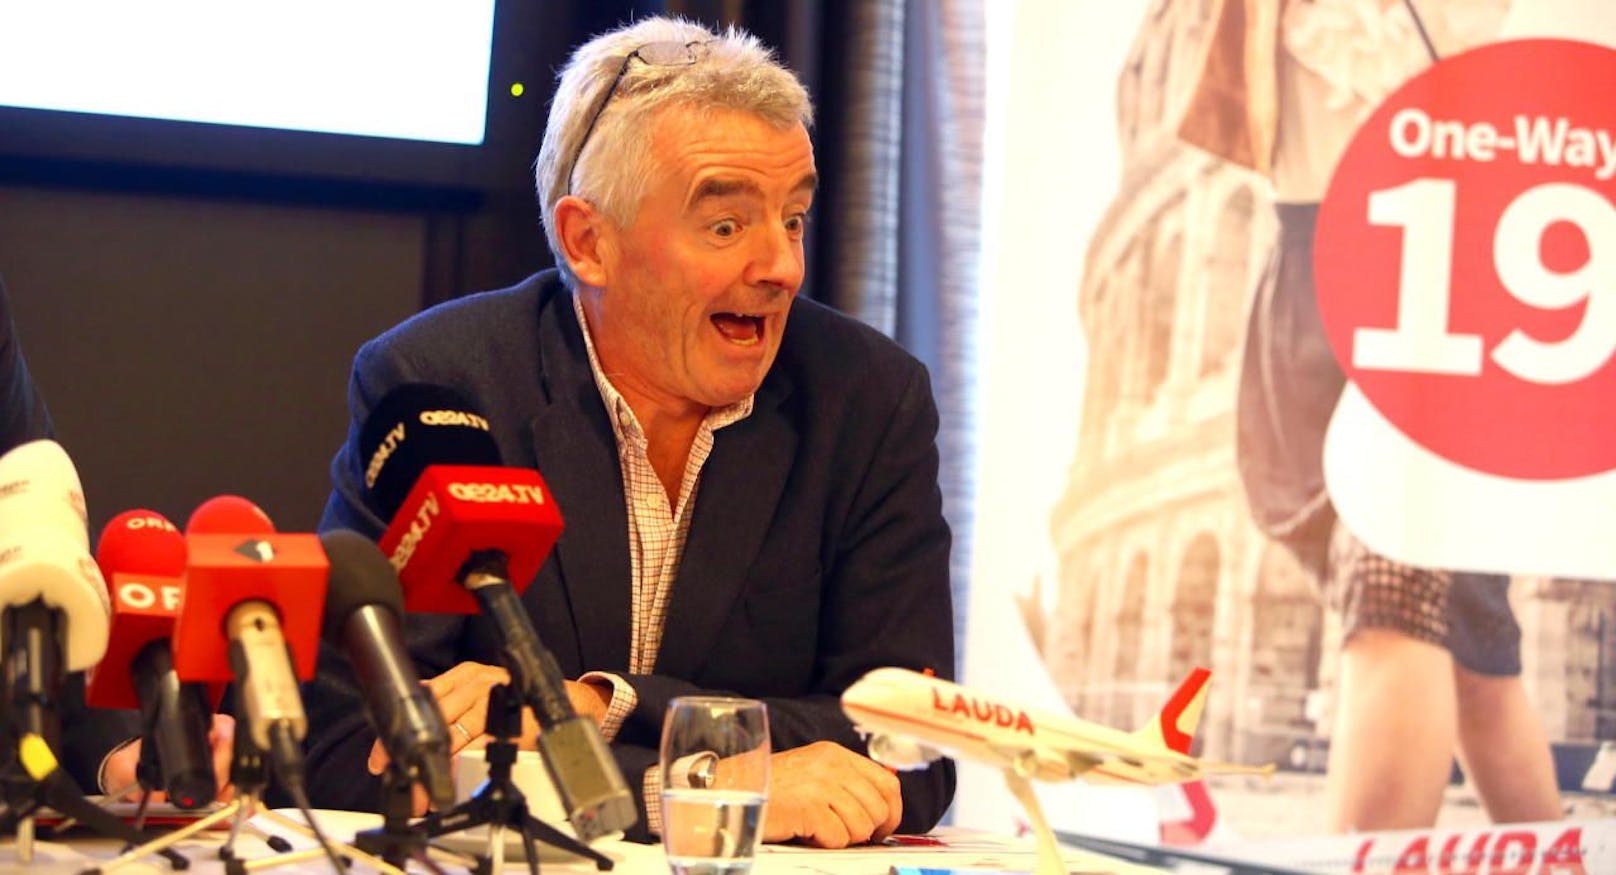 Michael OLeary.
